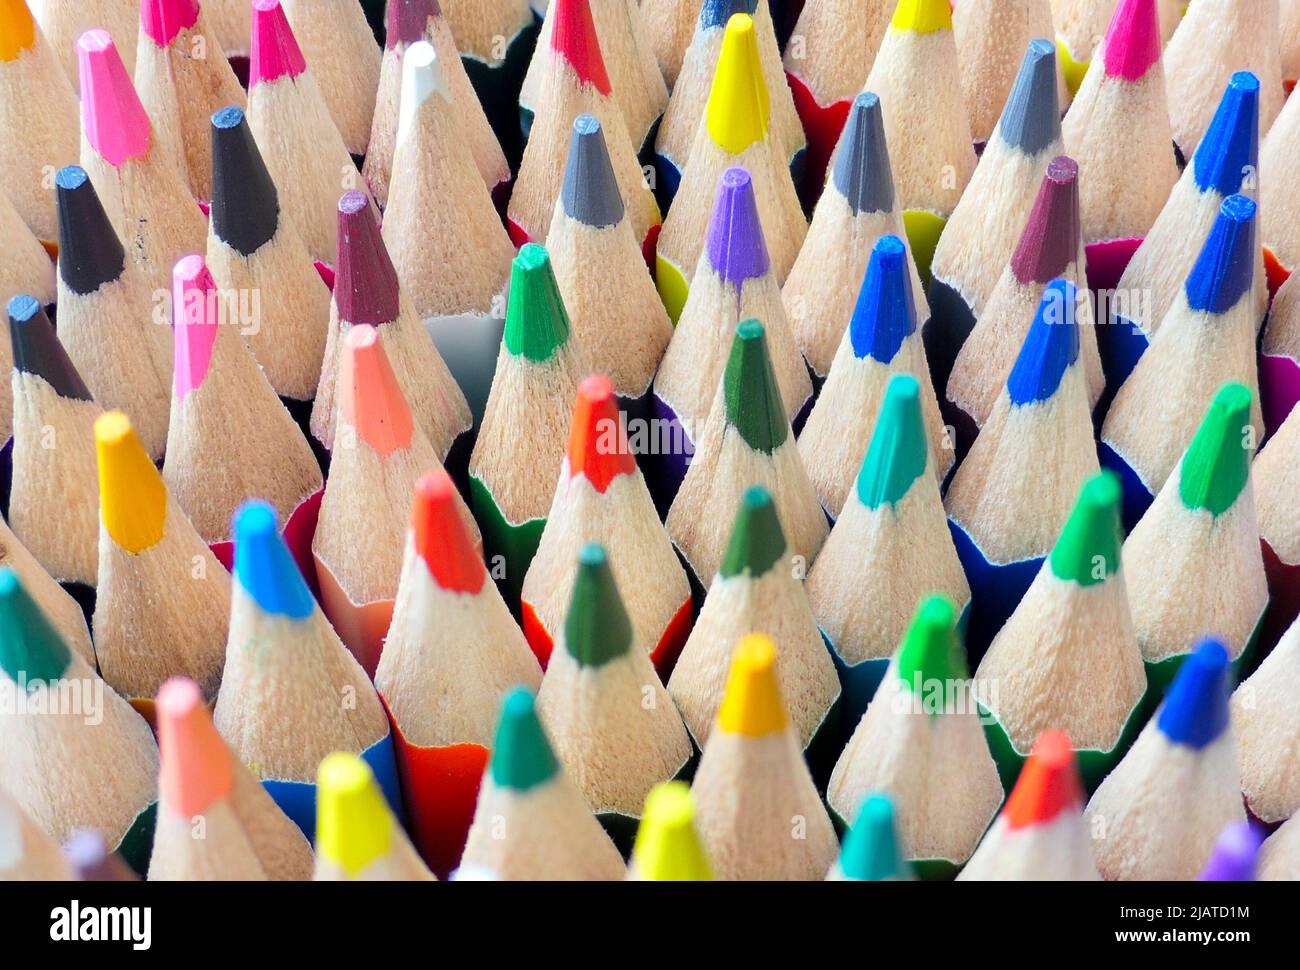 Close-up of coloured pencil tips standing upright. Art supplies. Focus towards the back. Stock Photo